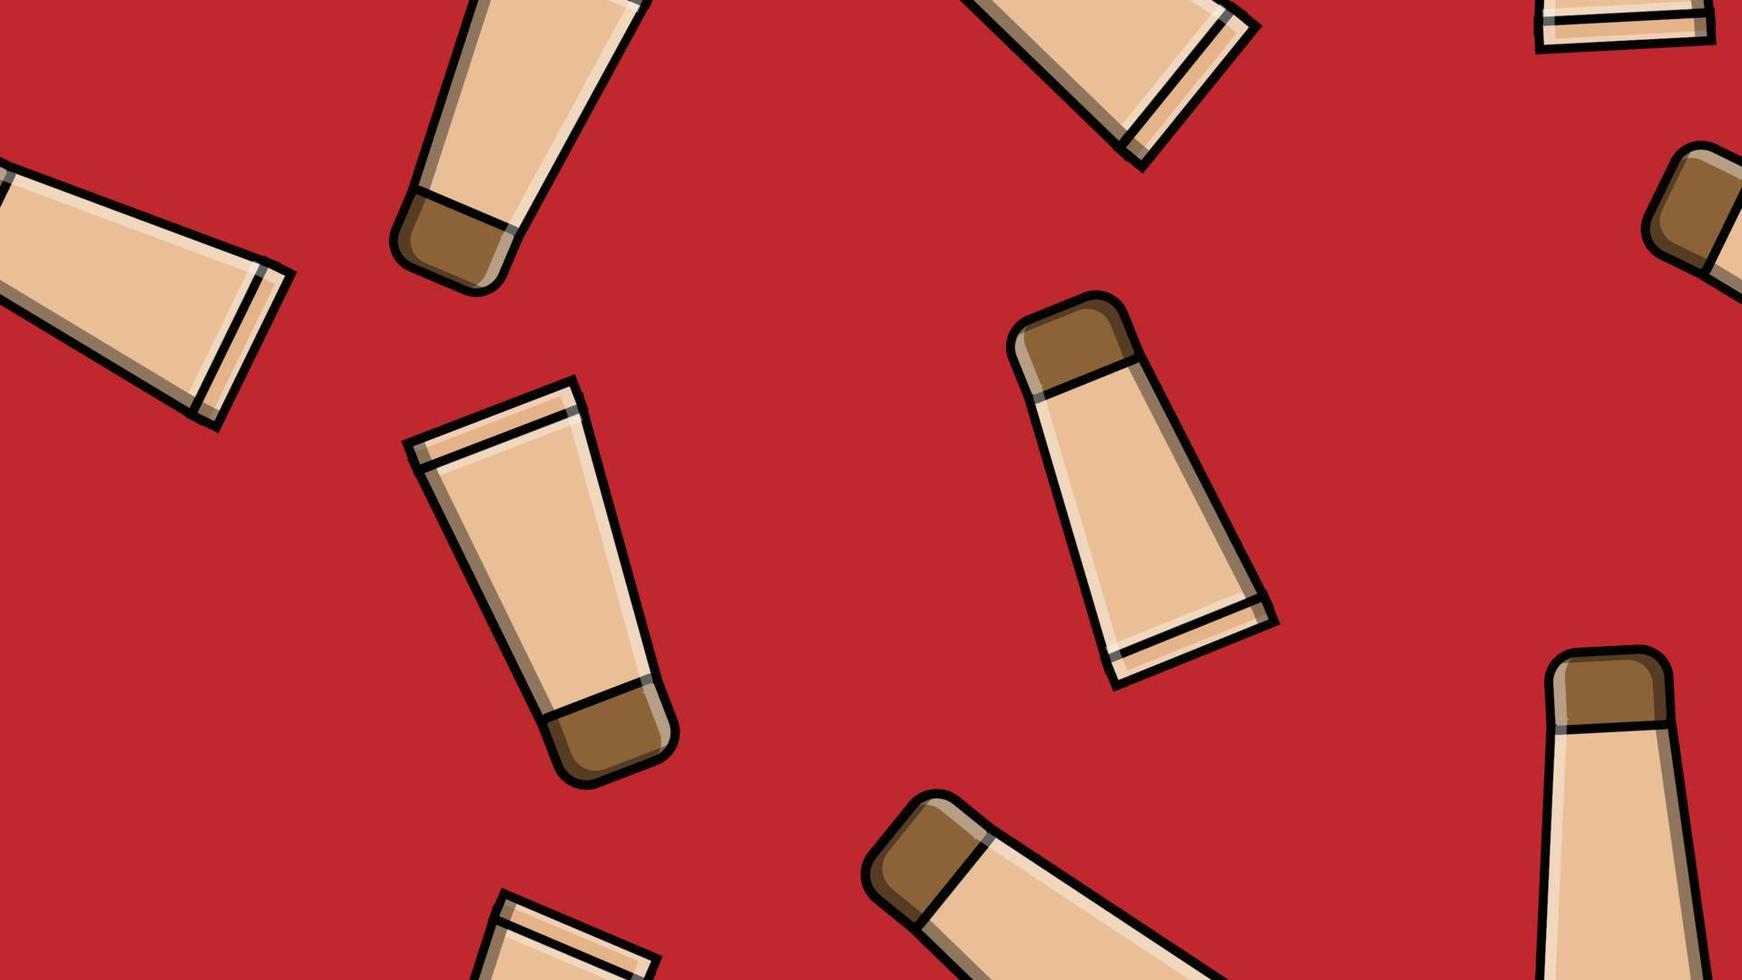 Endless seamless pattern of beautiful beauty items of female glamorous fashion tubes of makeup foundation on a red background. Vector illustration